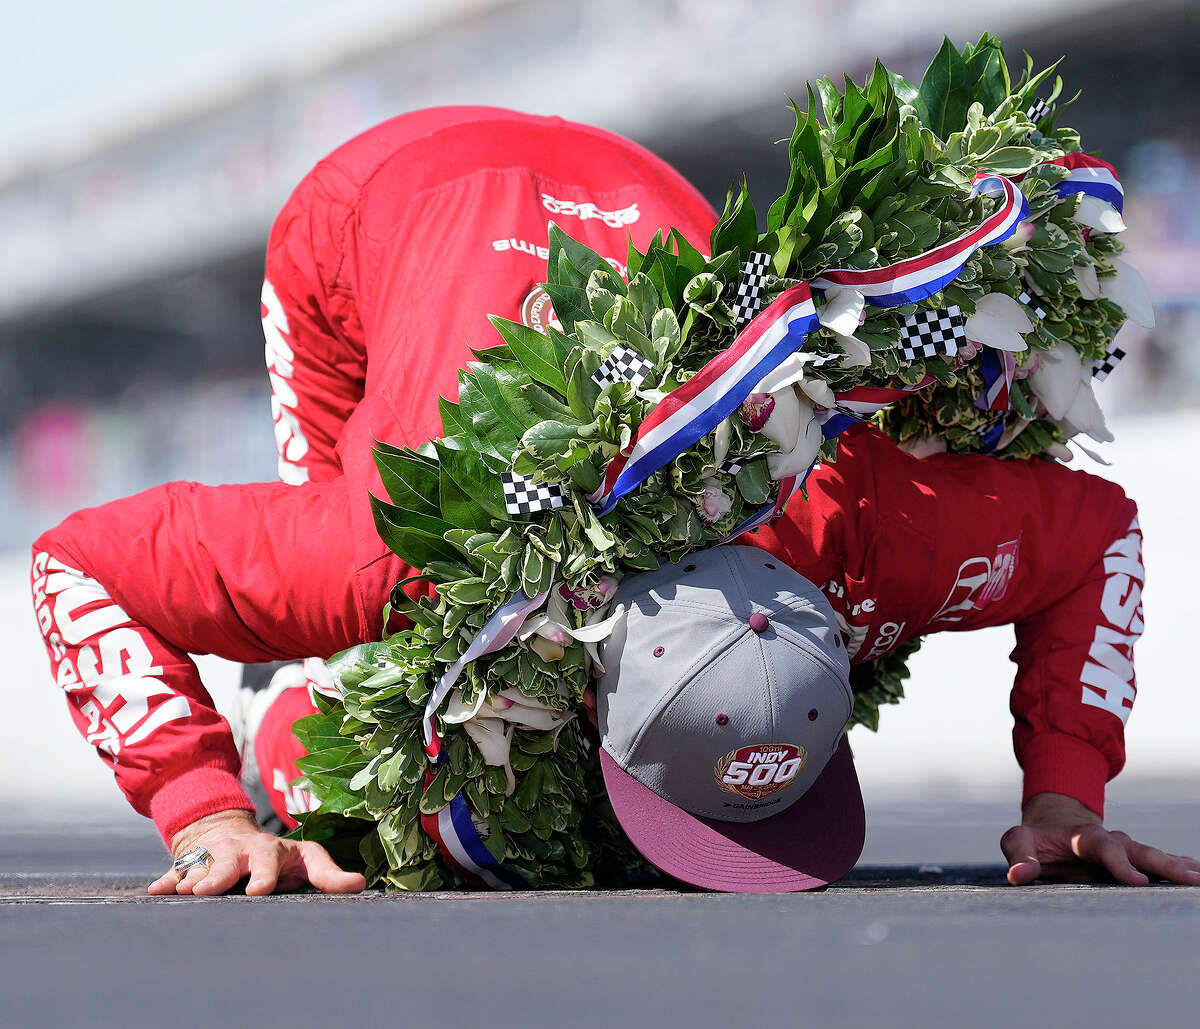 Marcus Ericsson of Sweden celebrates after winning Sunday's Indianapolis 500 by kissing the yard of bricks at Indianapolis Motor Speedway.